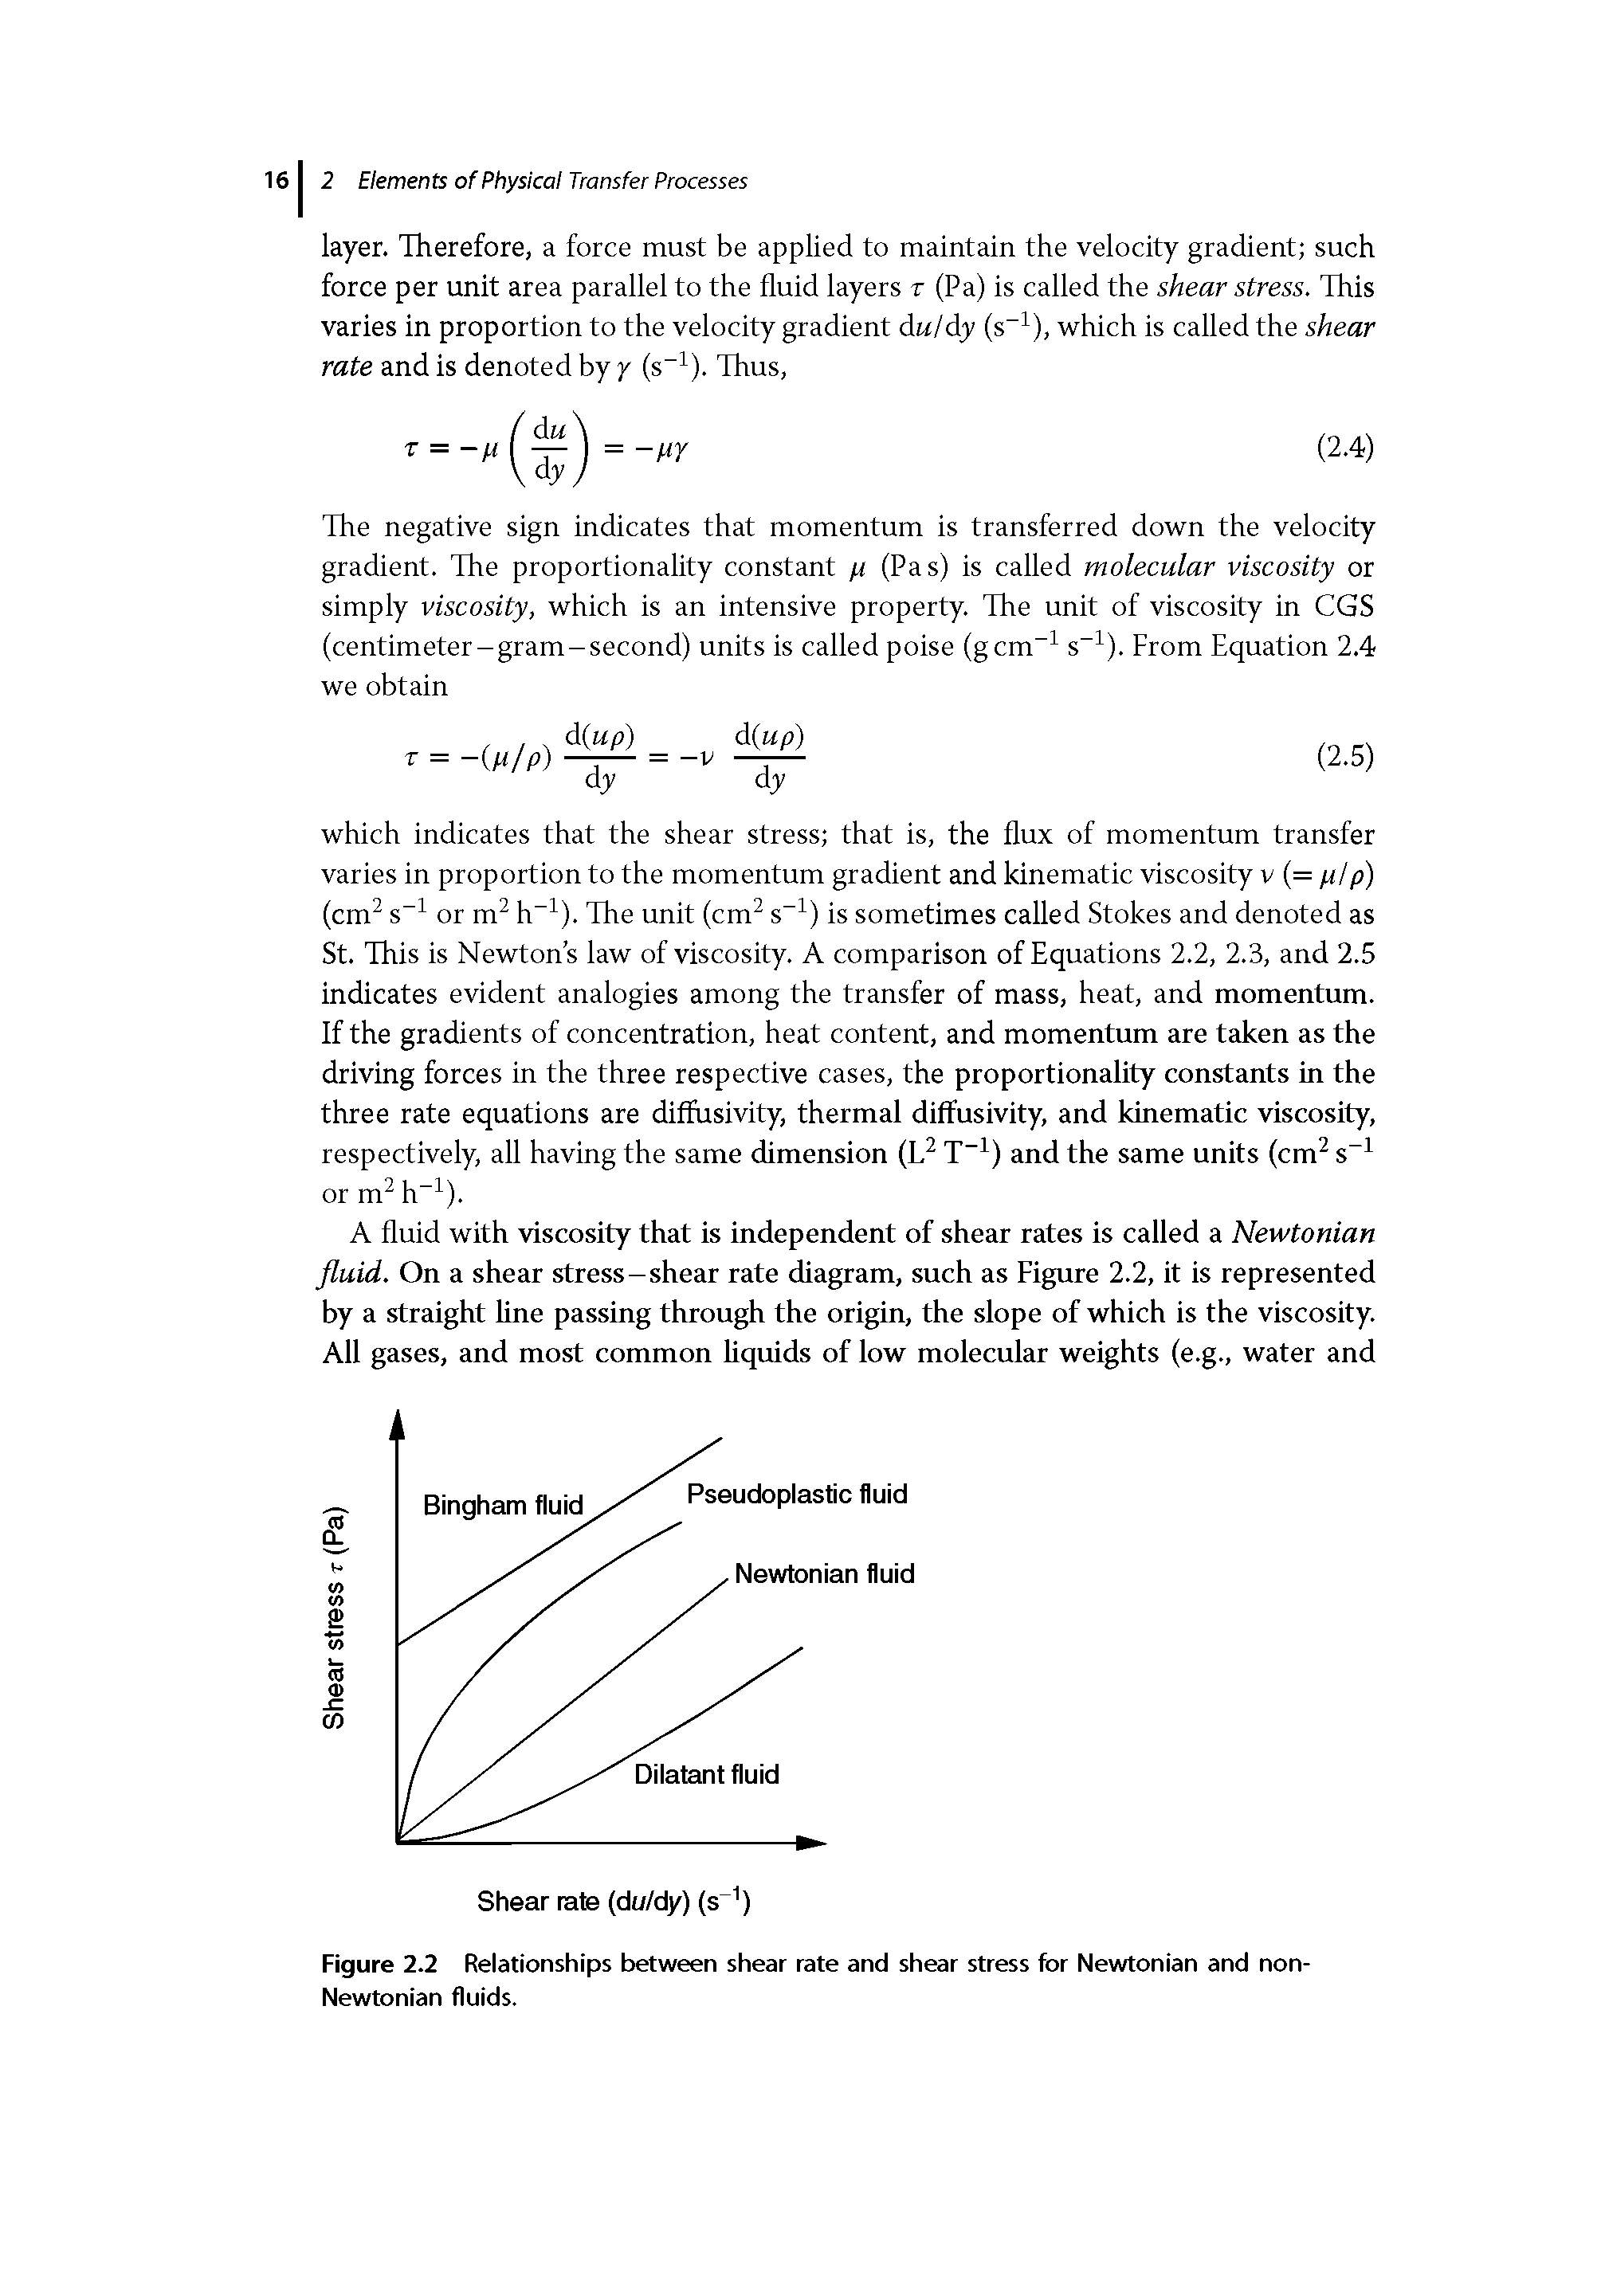 Figure 2.2 Relationships between shear rate and shear stress for Newtonian and non-Newtonian fluids.